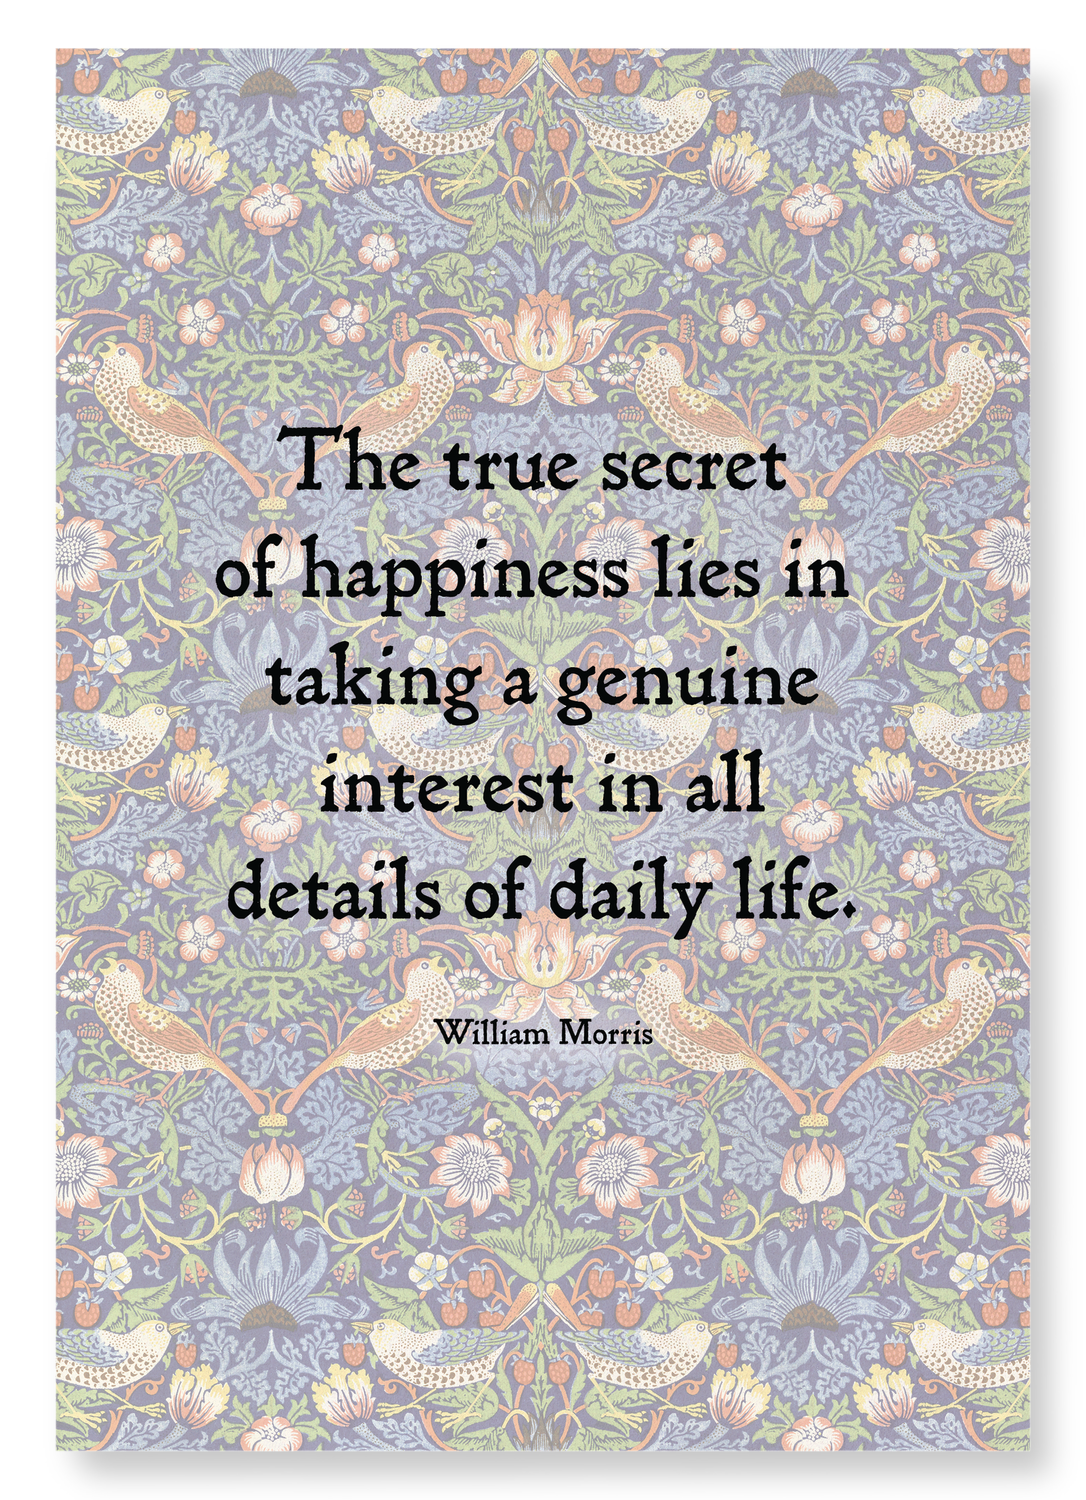 DAILY LIFE BY WILLIAM MORRIS